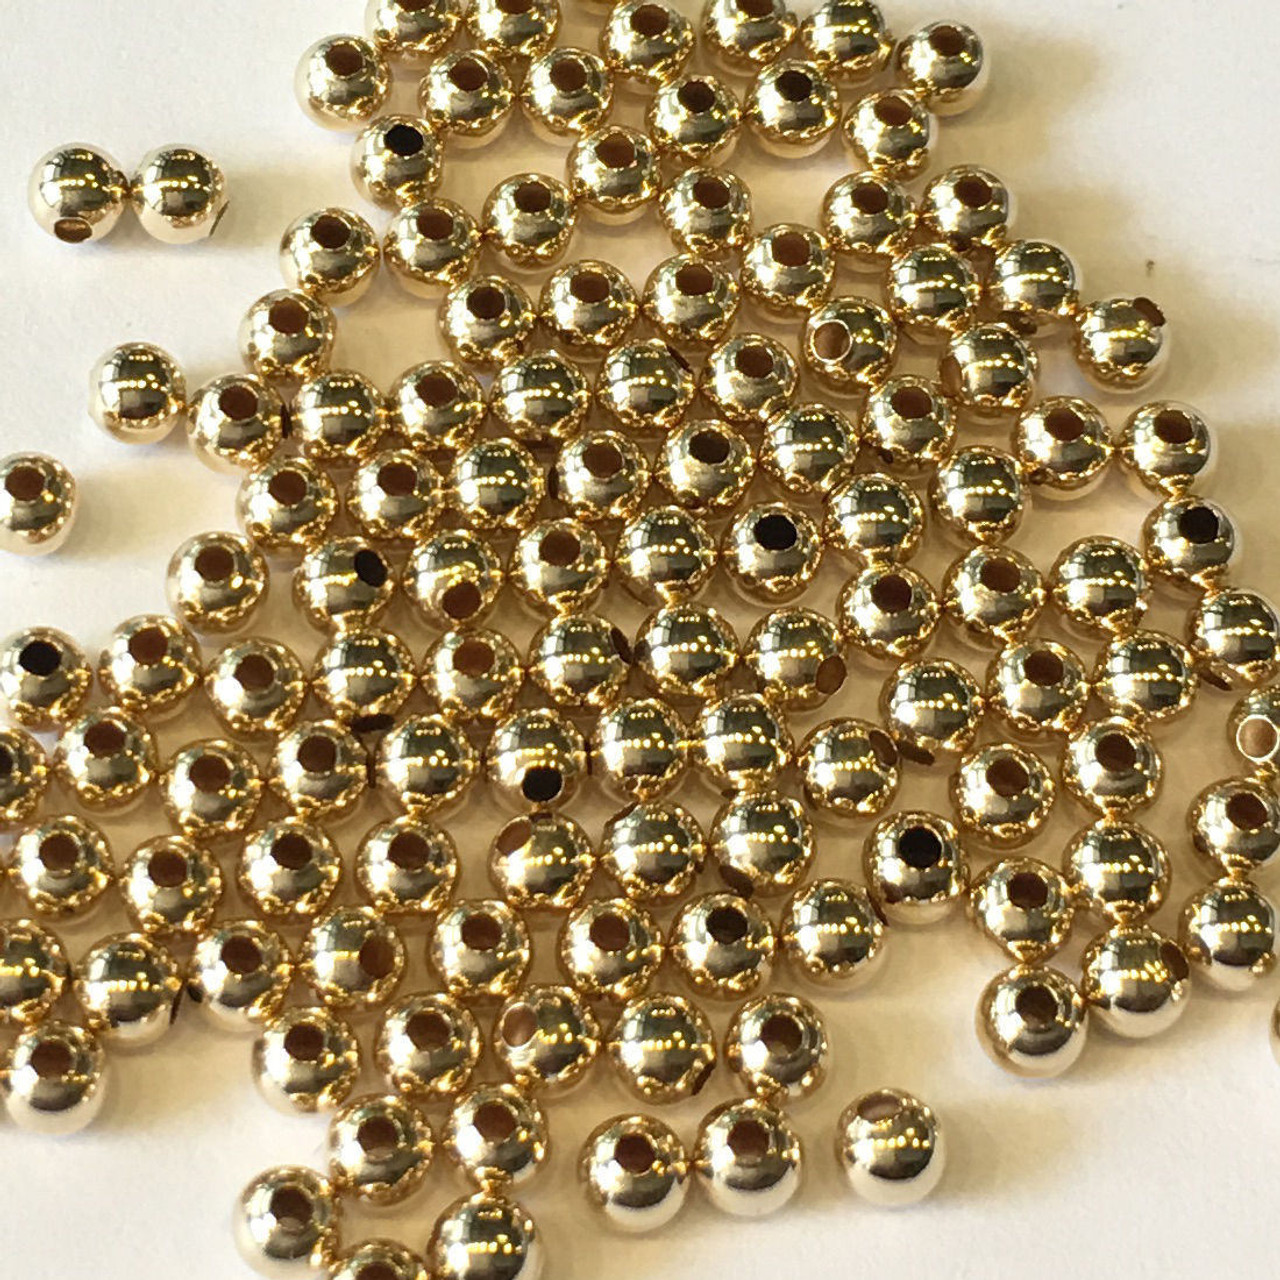 Gold Filled Round Stardust Beads Size 2mm, 3mm, 4mm, 5mm, 6mm, 8mm, 10mm,  12mm, 14mm, 16mm